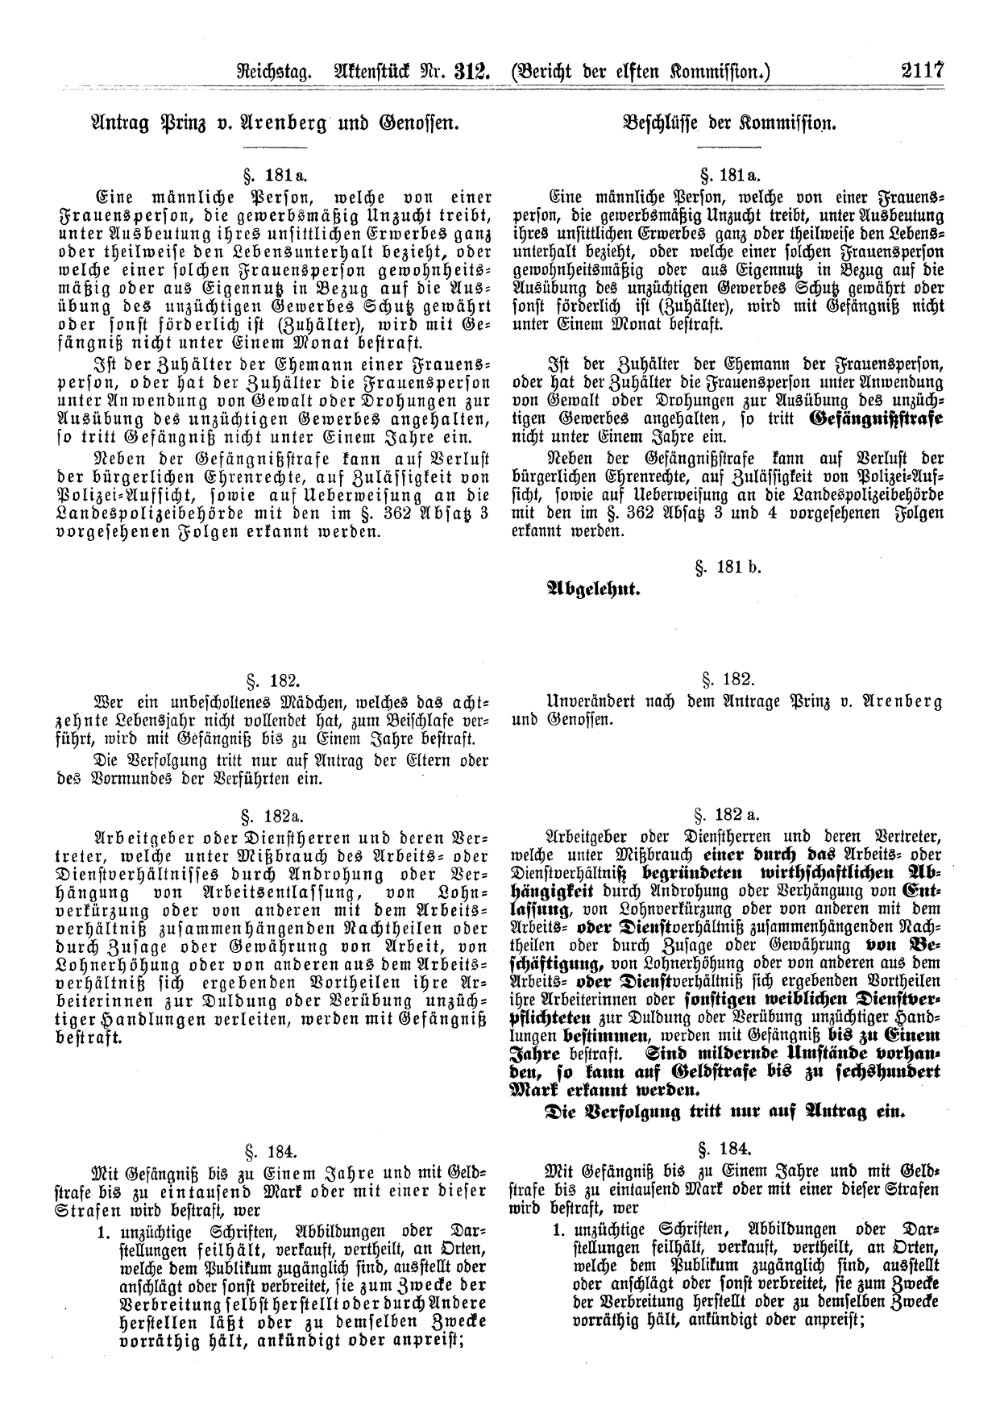 Scan of page 2117